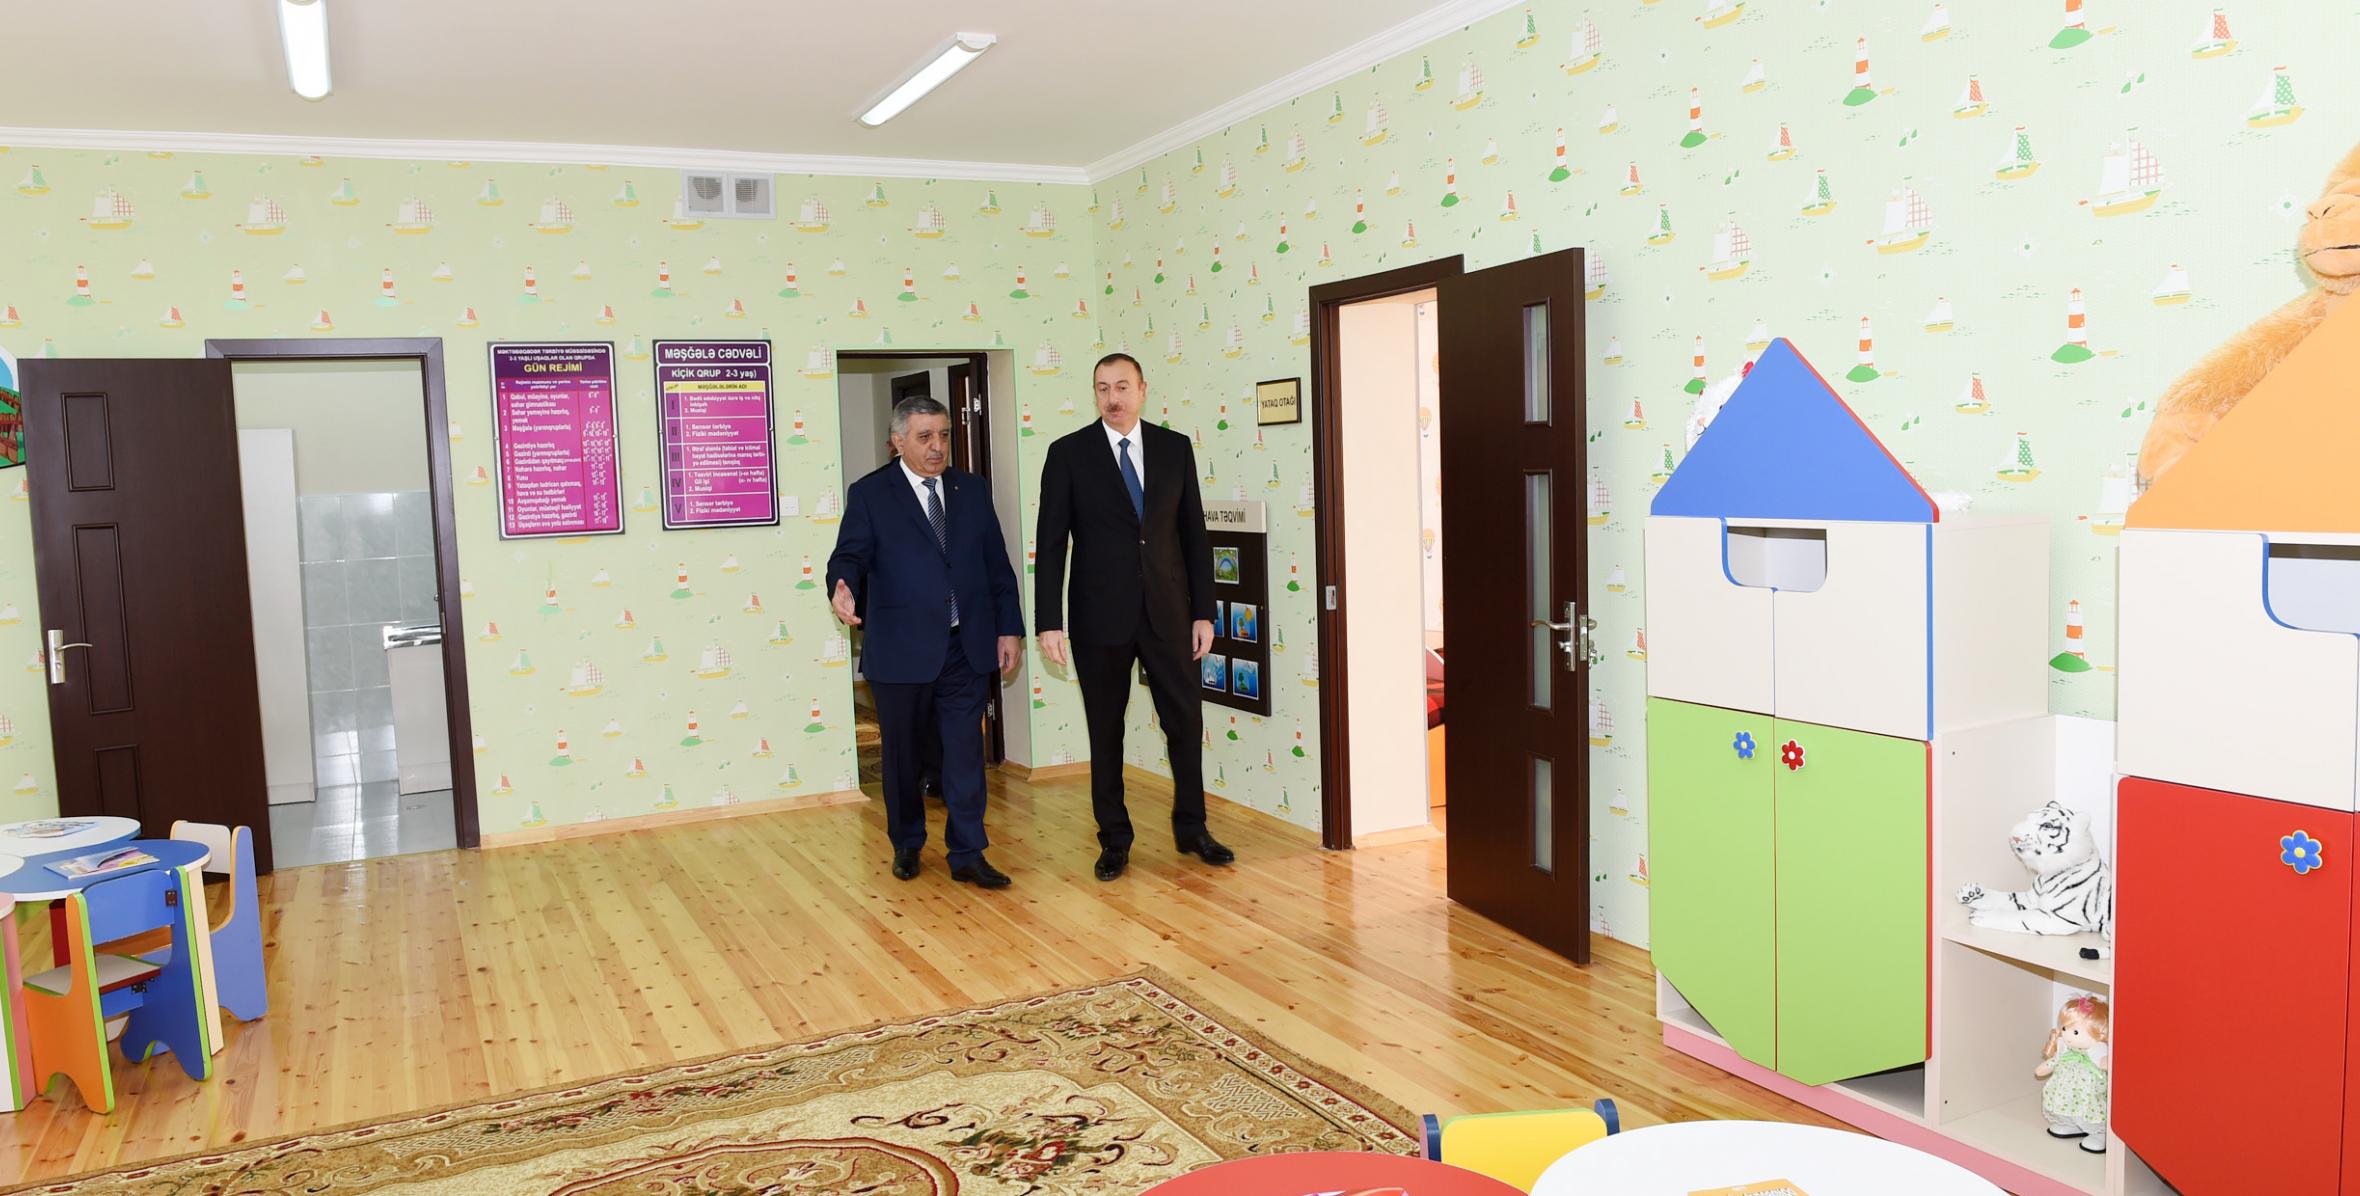 Ilham Aliyev attended the opening of a kindergarten constructed on the initiative of the Heydar Aliyev Foundation in Zagatala